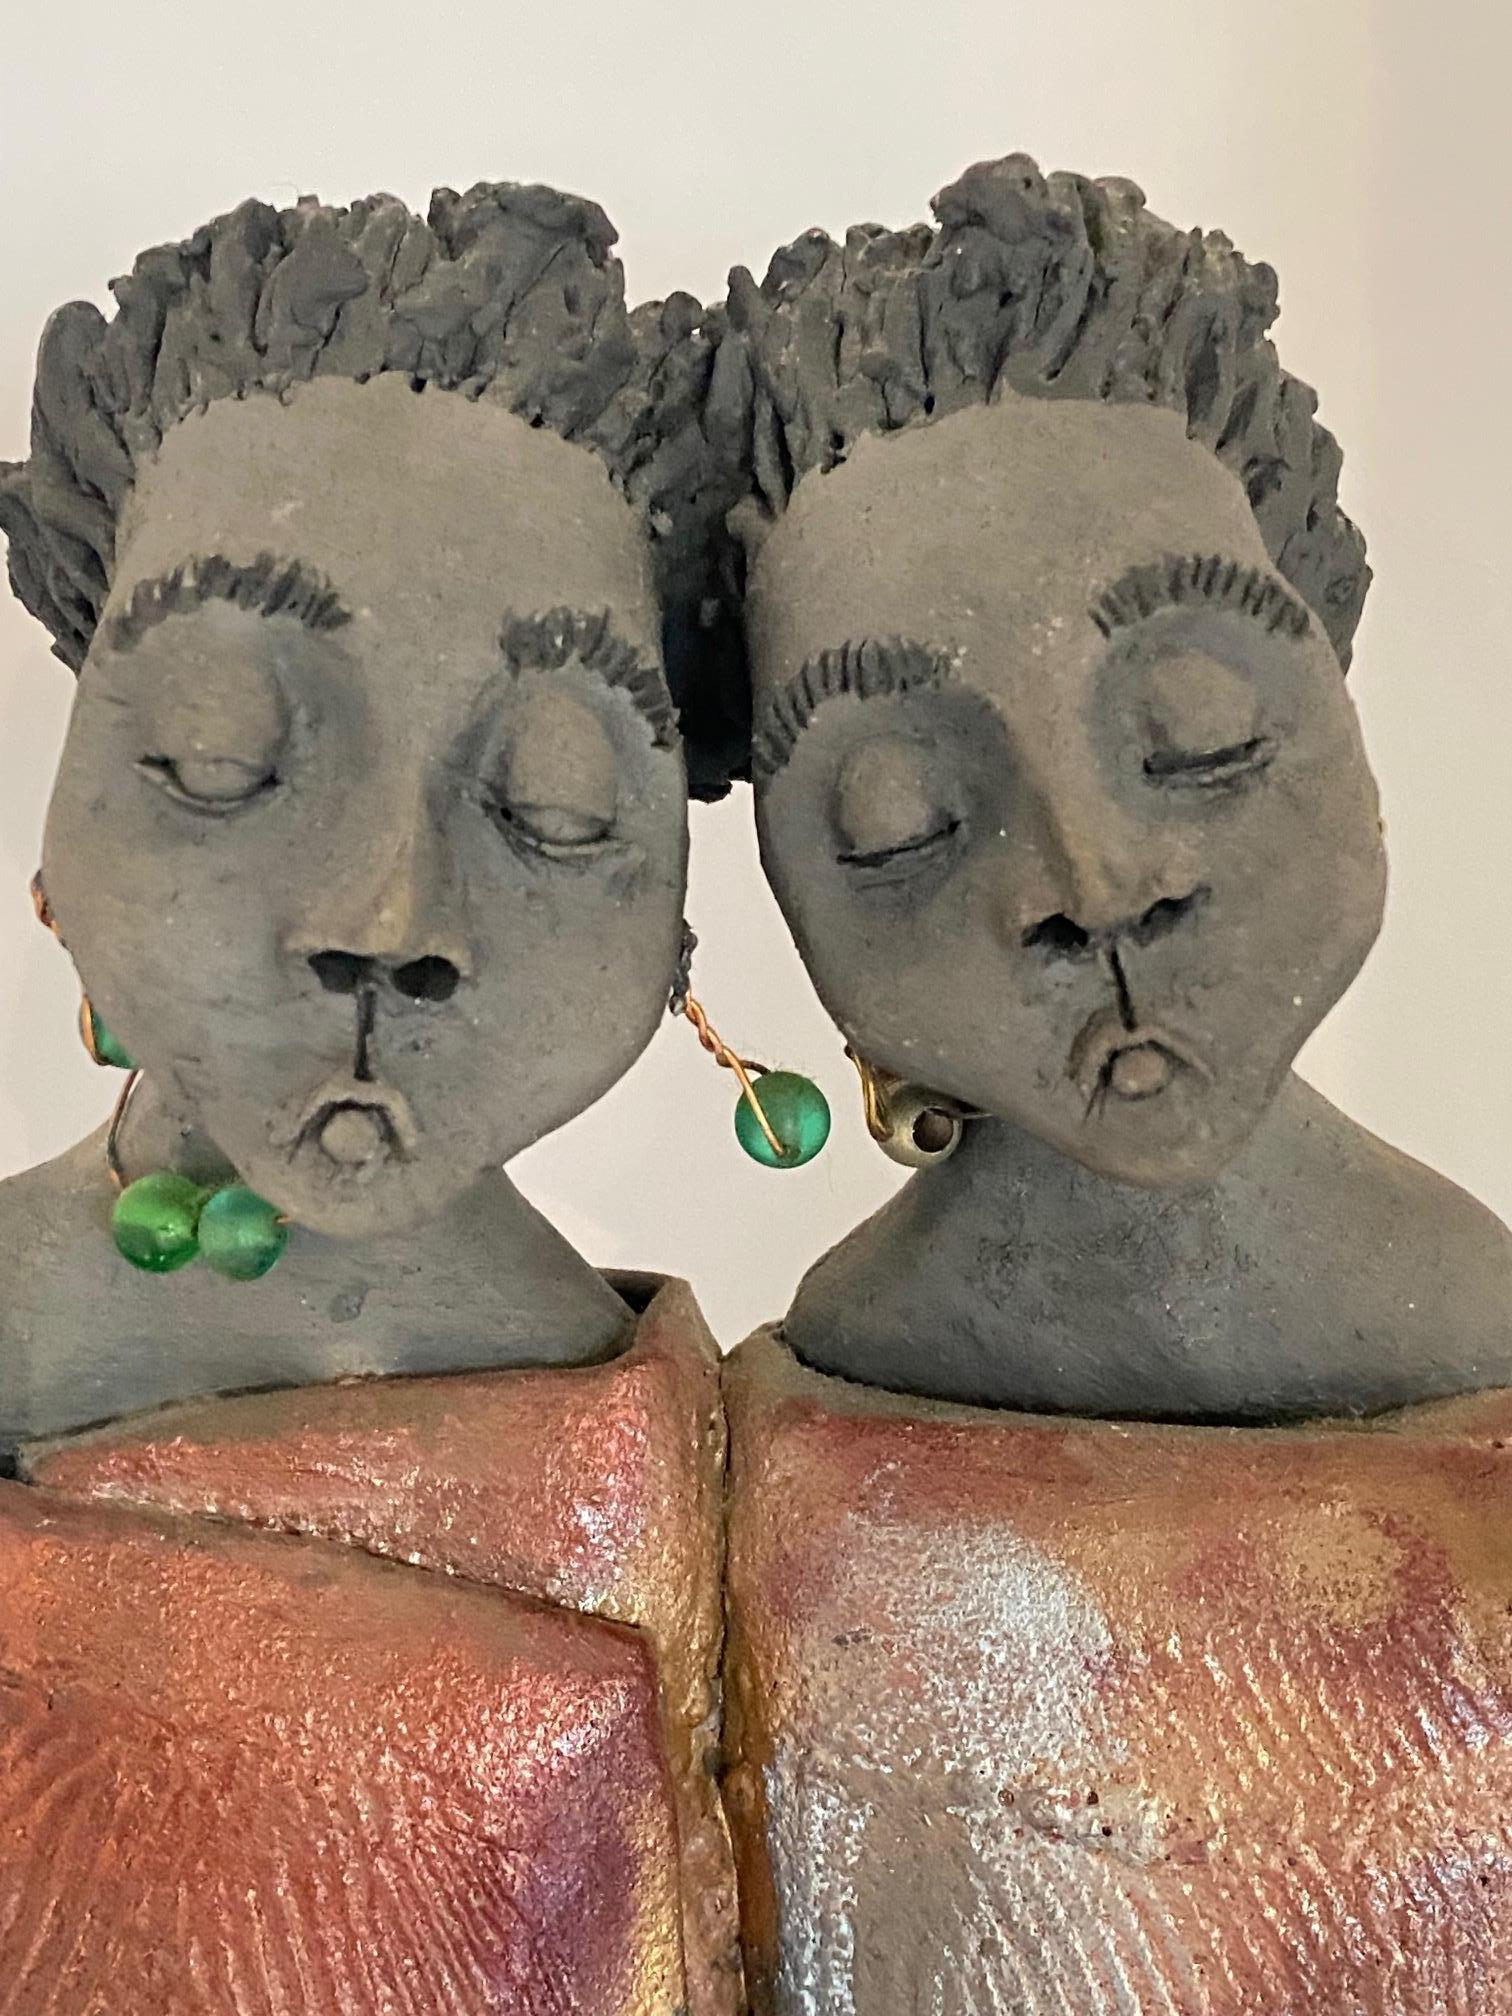 This sculpture is a beautiful ceramic piece depicting two women leaning affectionately toward each other. The women are wrapped in a large, unique cloak covering their bodies. The two women are wearing green earrings and have short hair. The